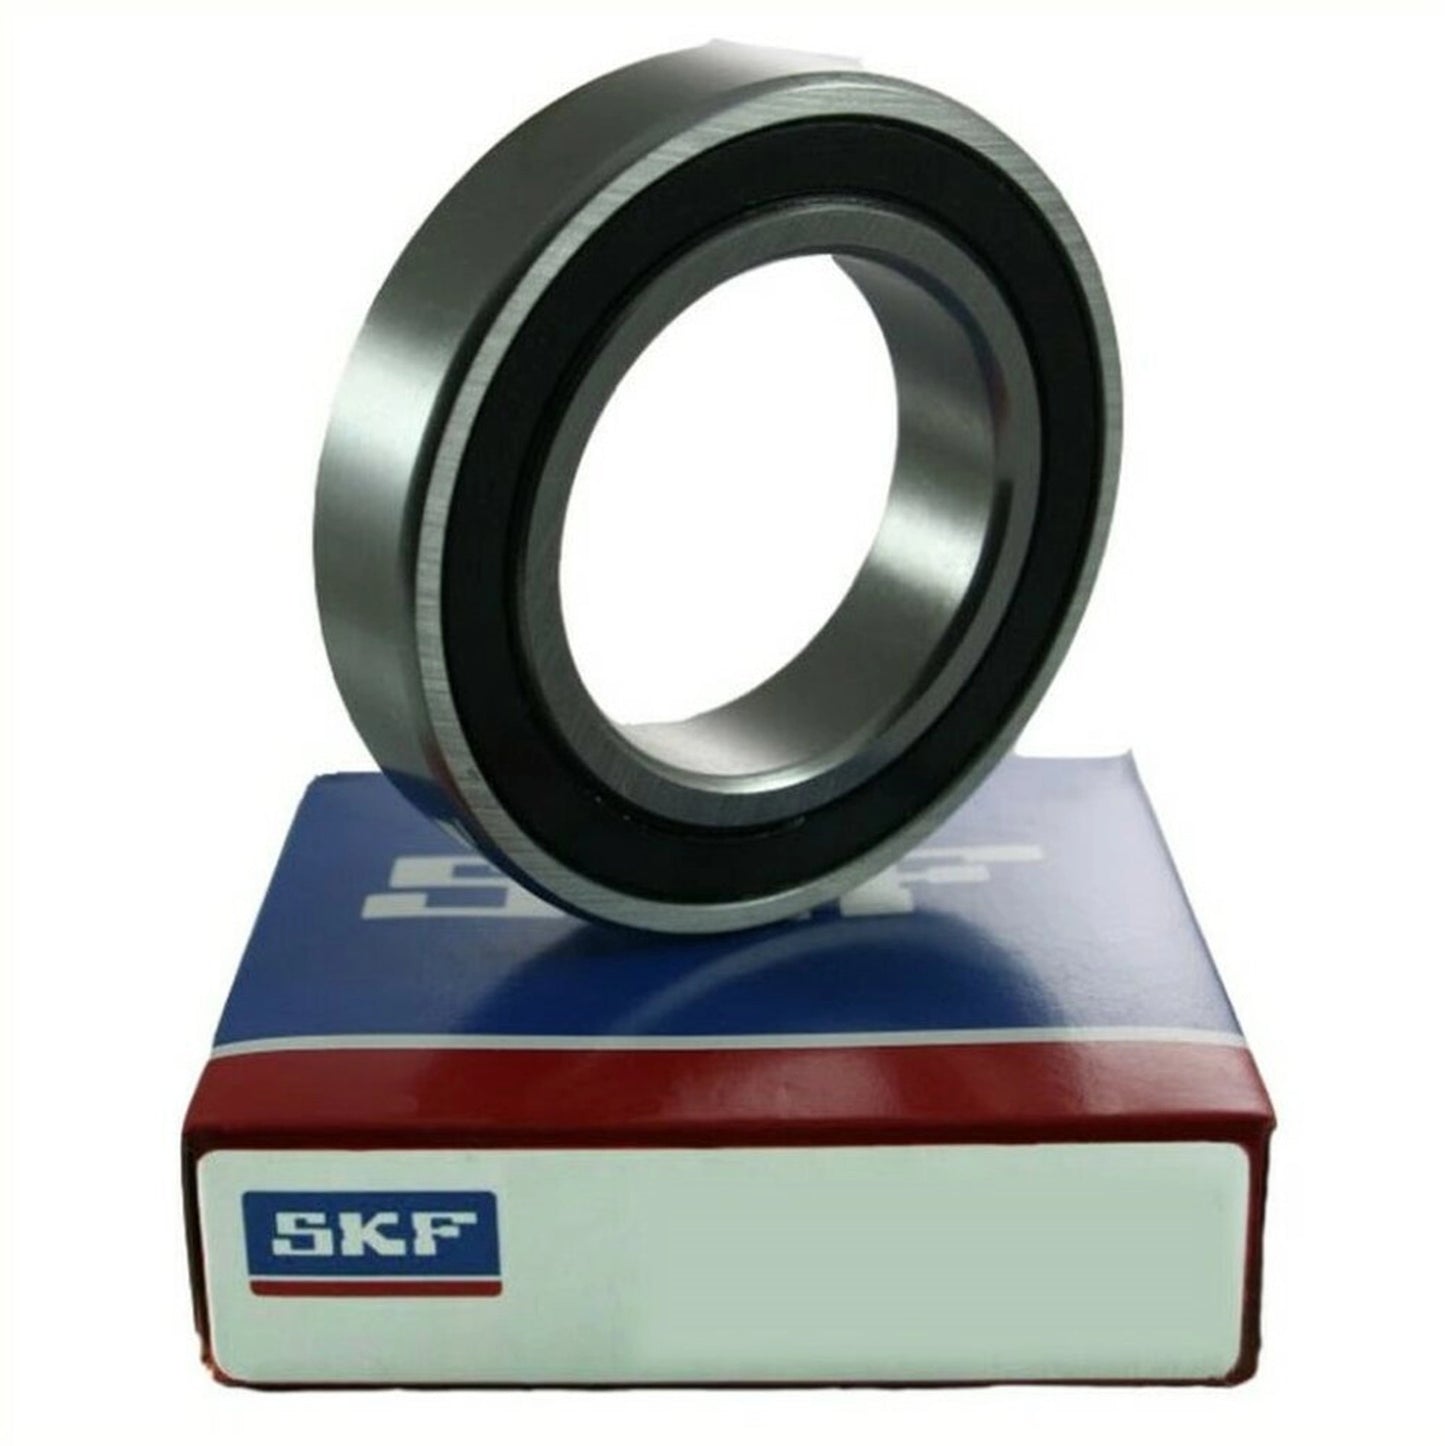 Lager 6306-2RS1 / C3 30x72x19 SKF